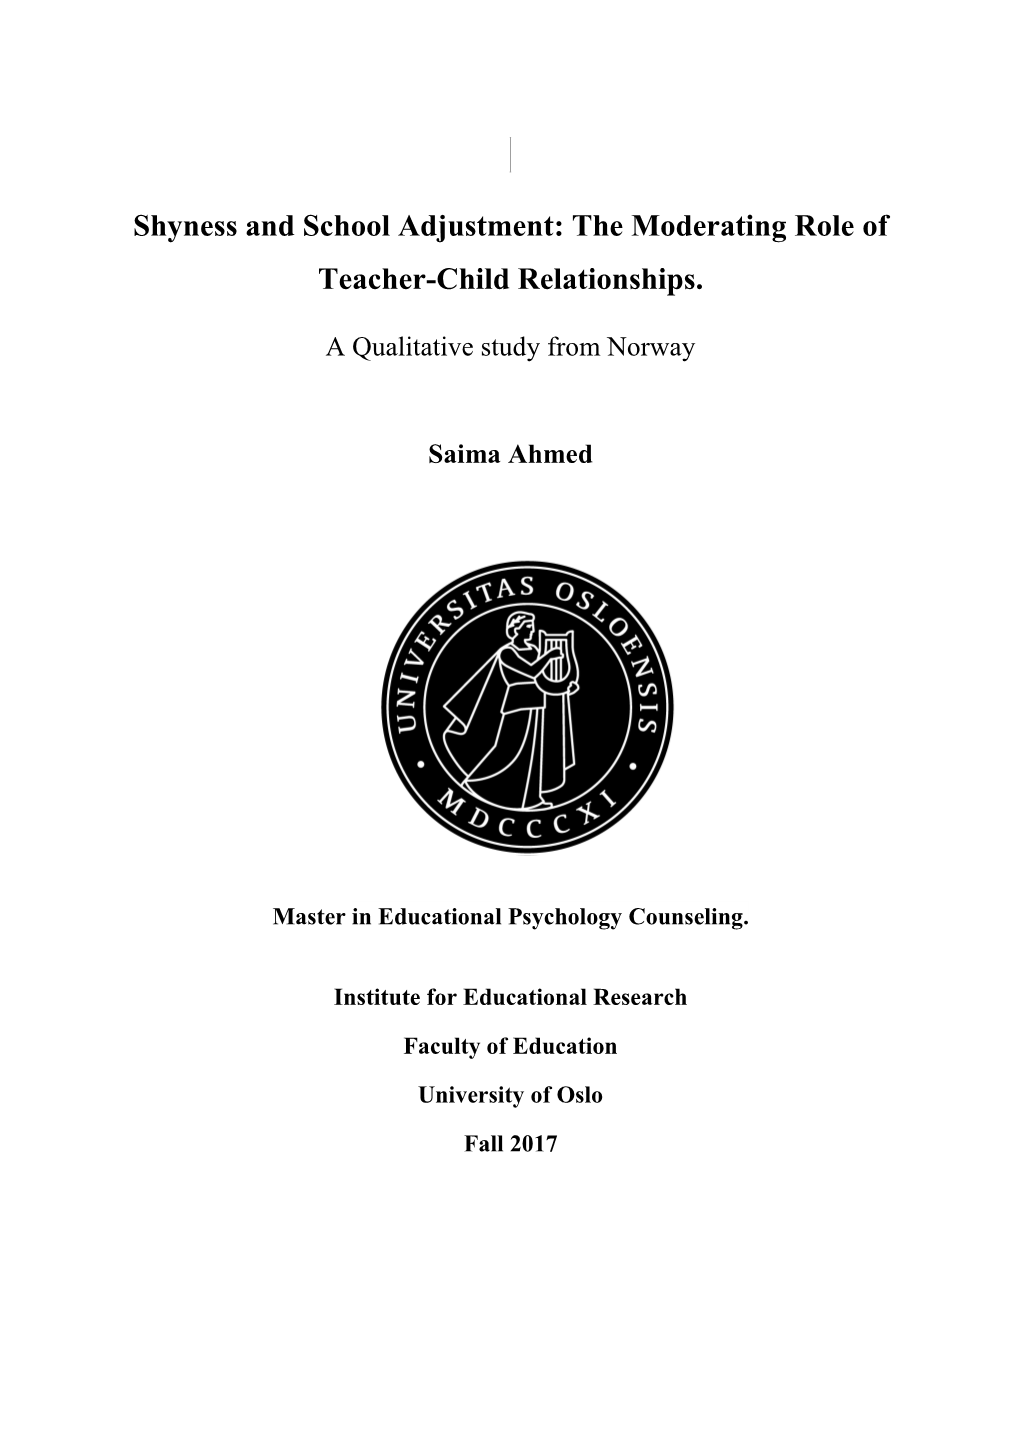 Shyness and School Adjustment: the Moderating Role of Teacher-Child Relationships